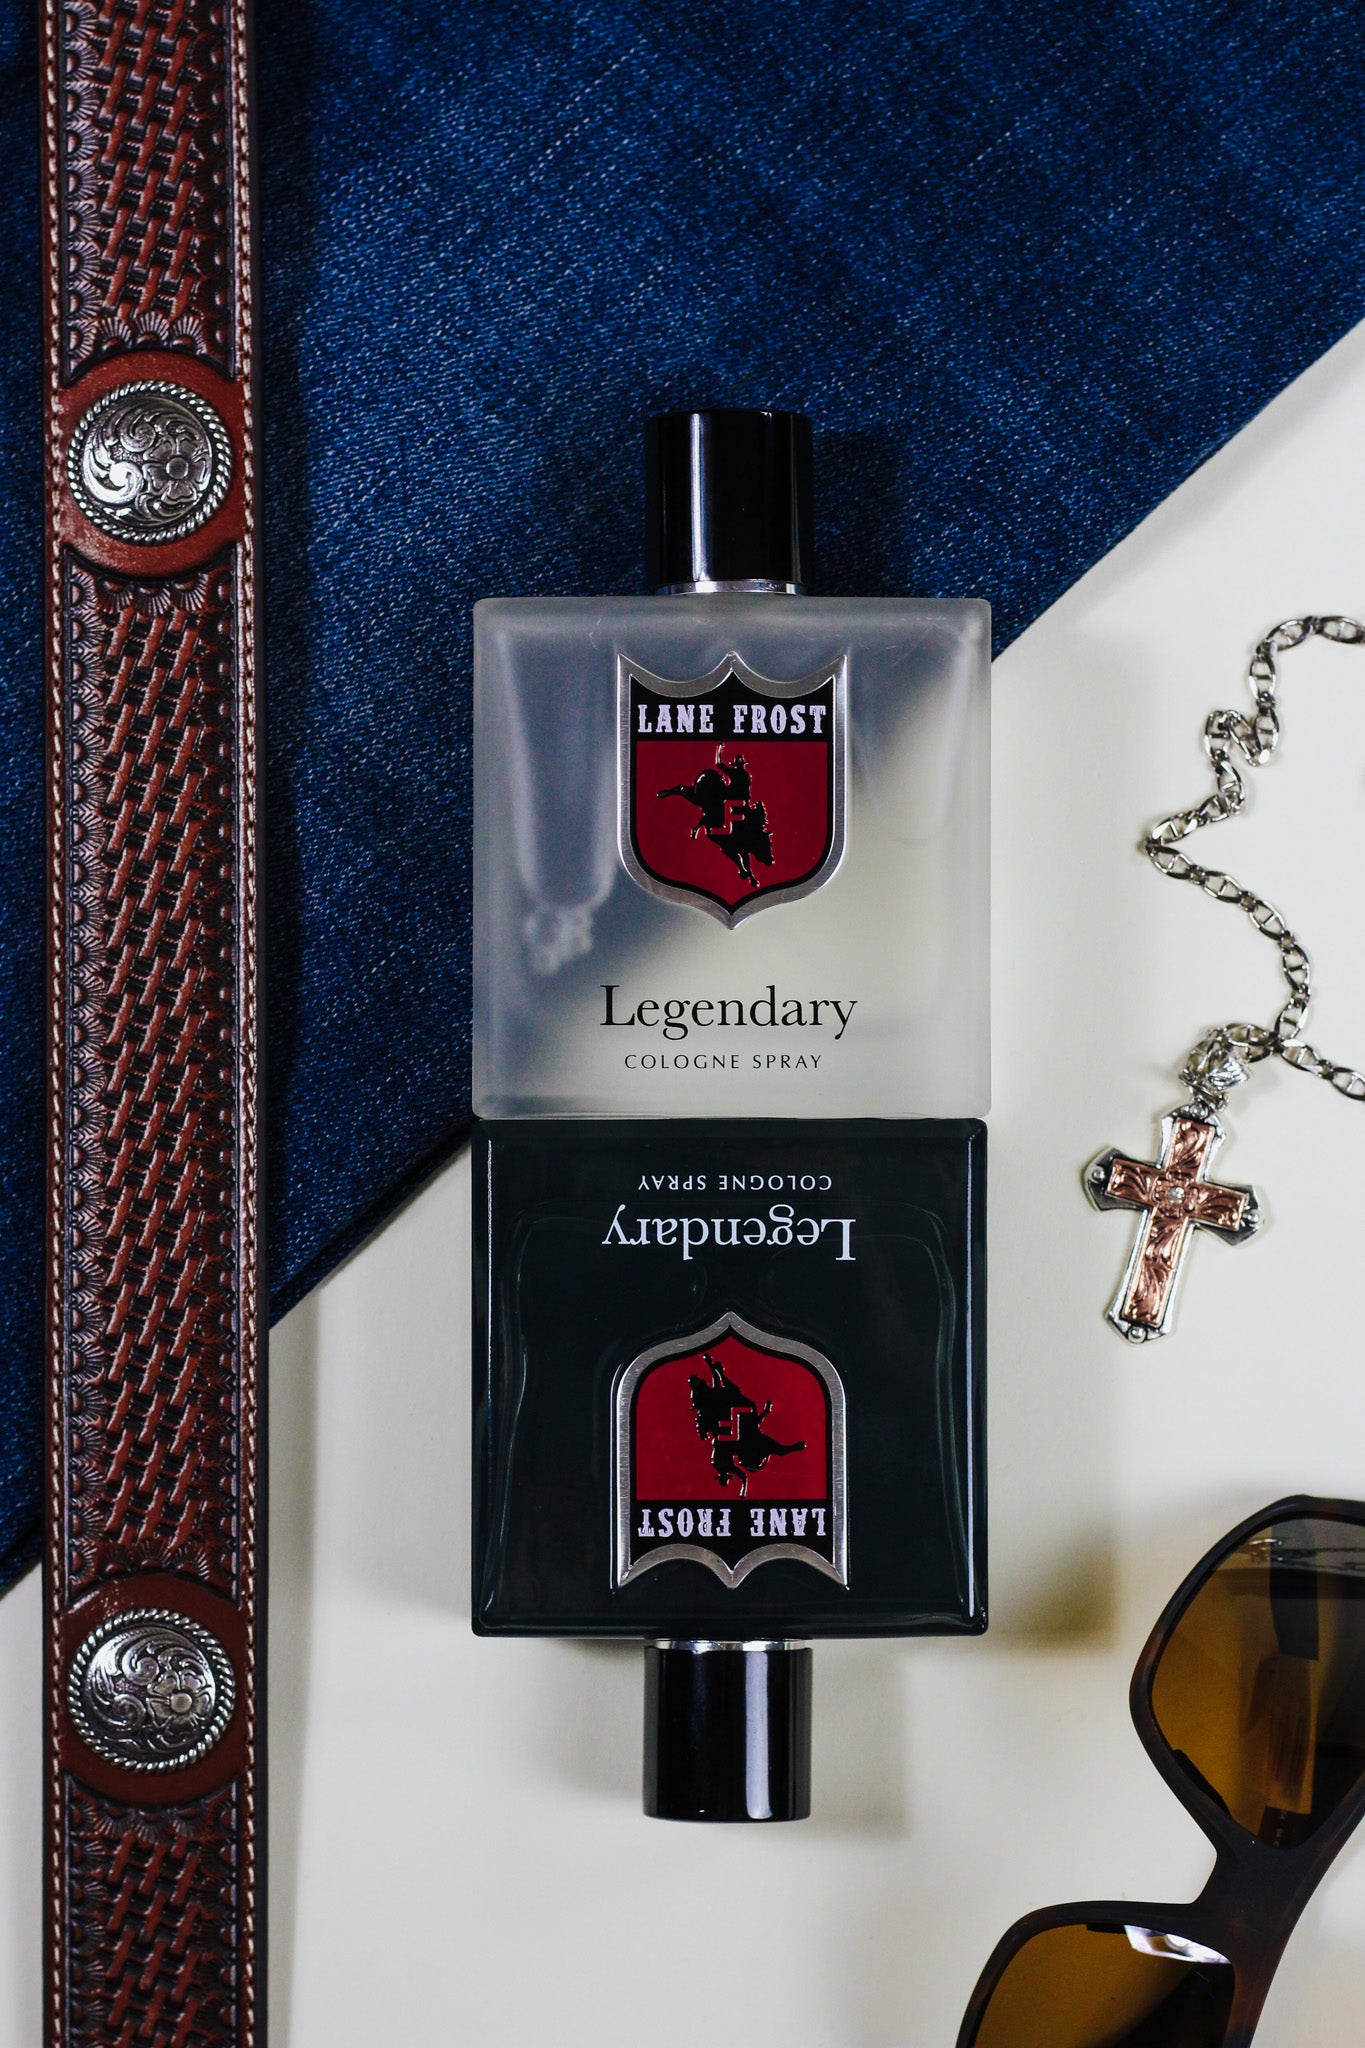 Frosted Legendary Cologne